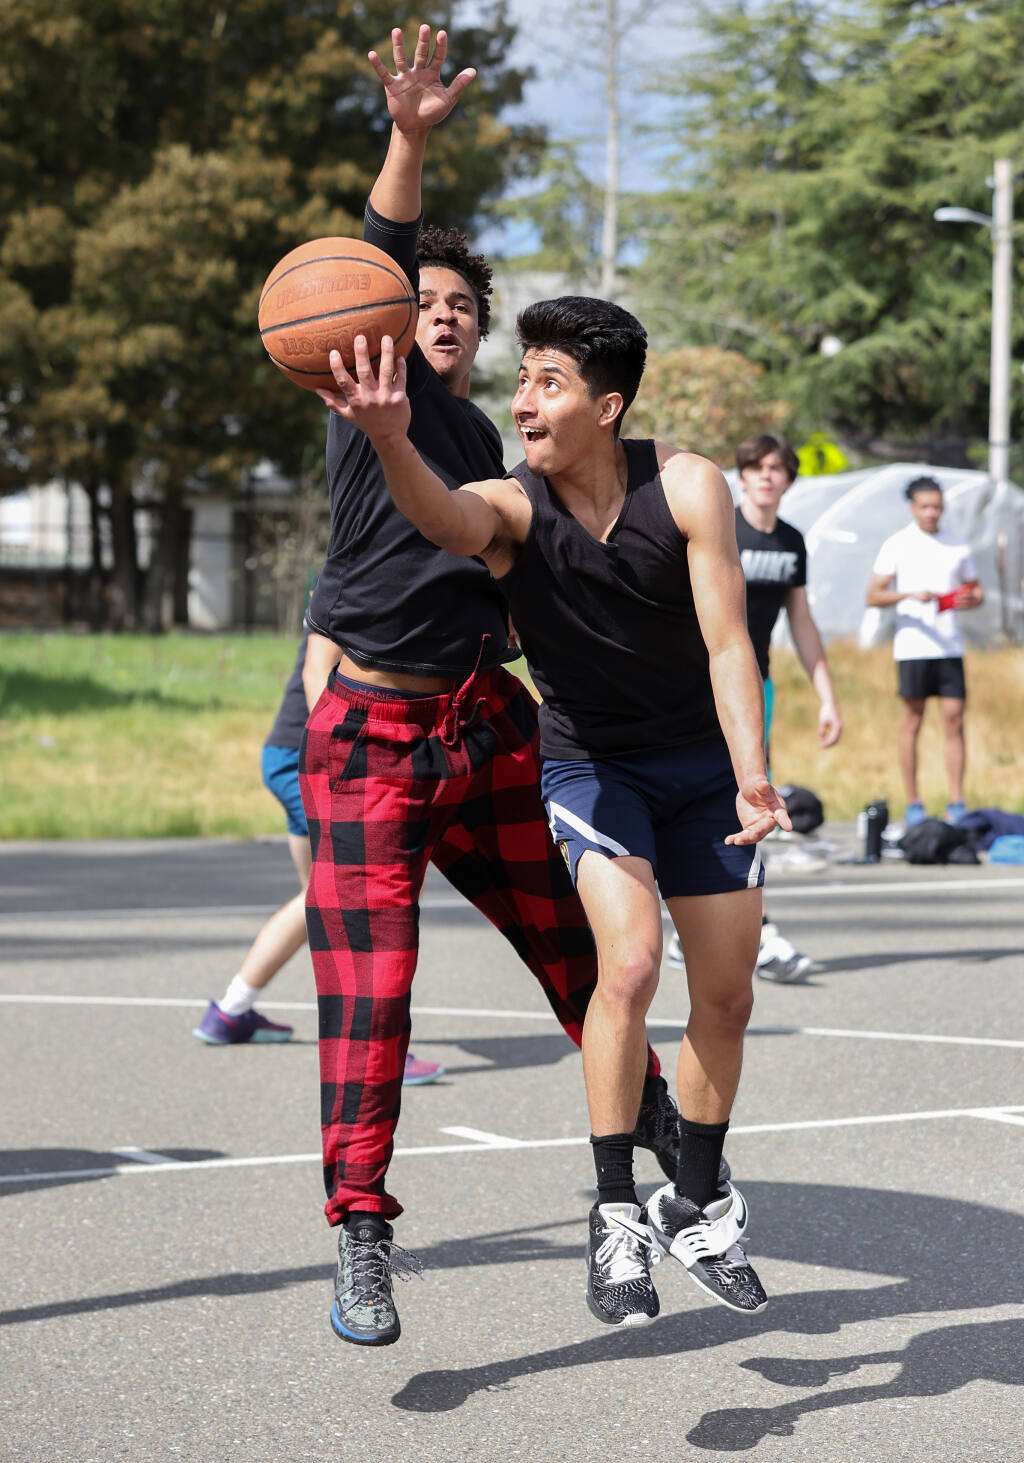 Braulio Juarez, right, scoops a shot around Exodus Daniels during a pickup game of basketball in Sebastopol on Friday, March 25, 2022.  (Christopher Chung/ The Press Democrat)